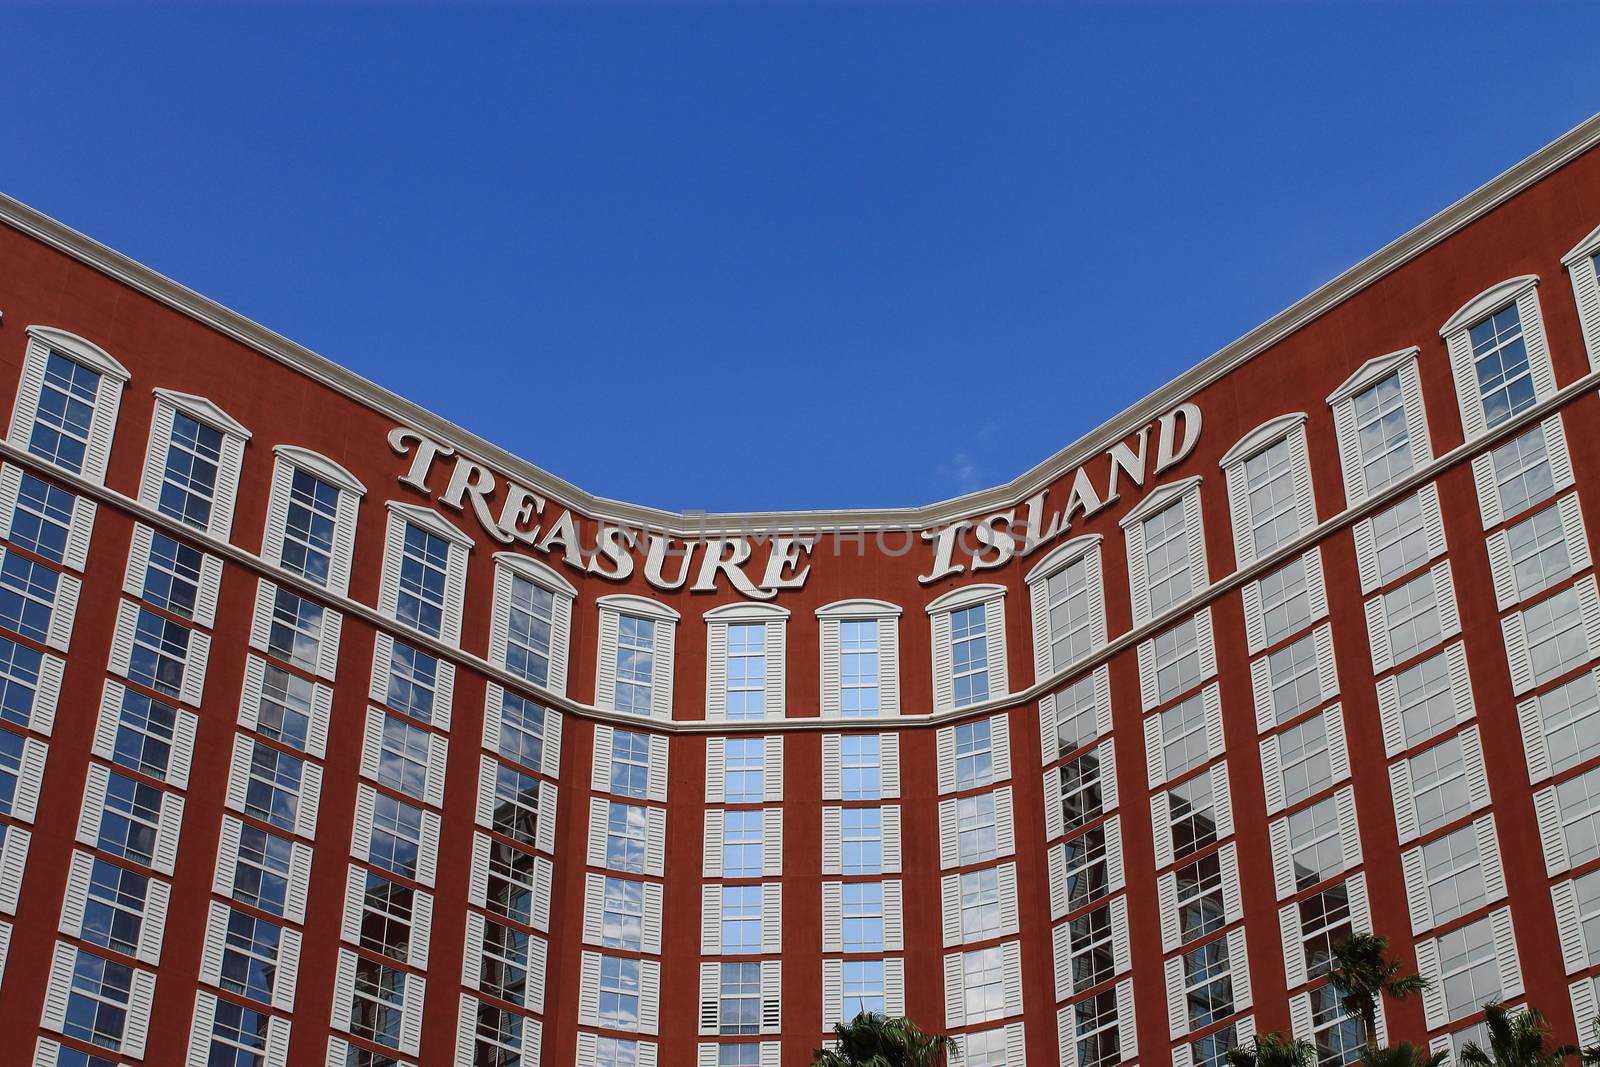 Treasure Island Hotel and Casino sign on the famous Las Vegas Strip.